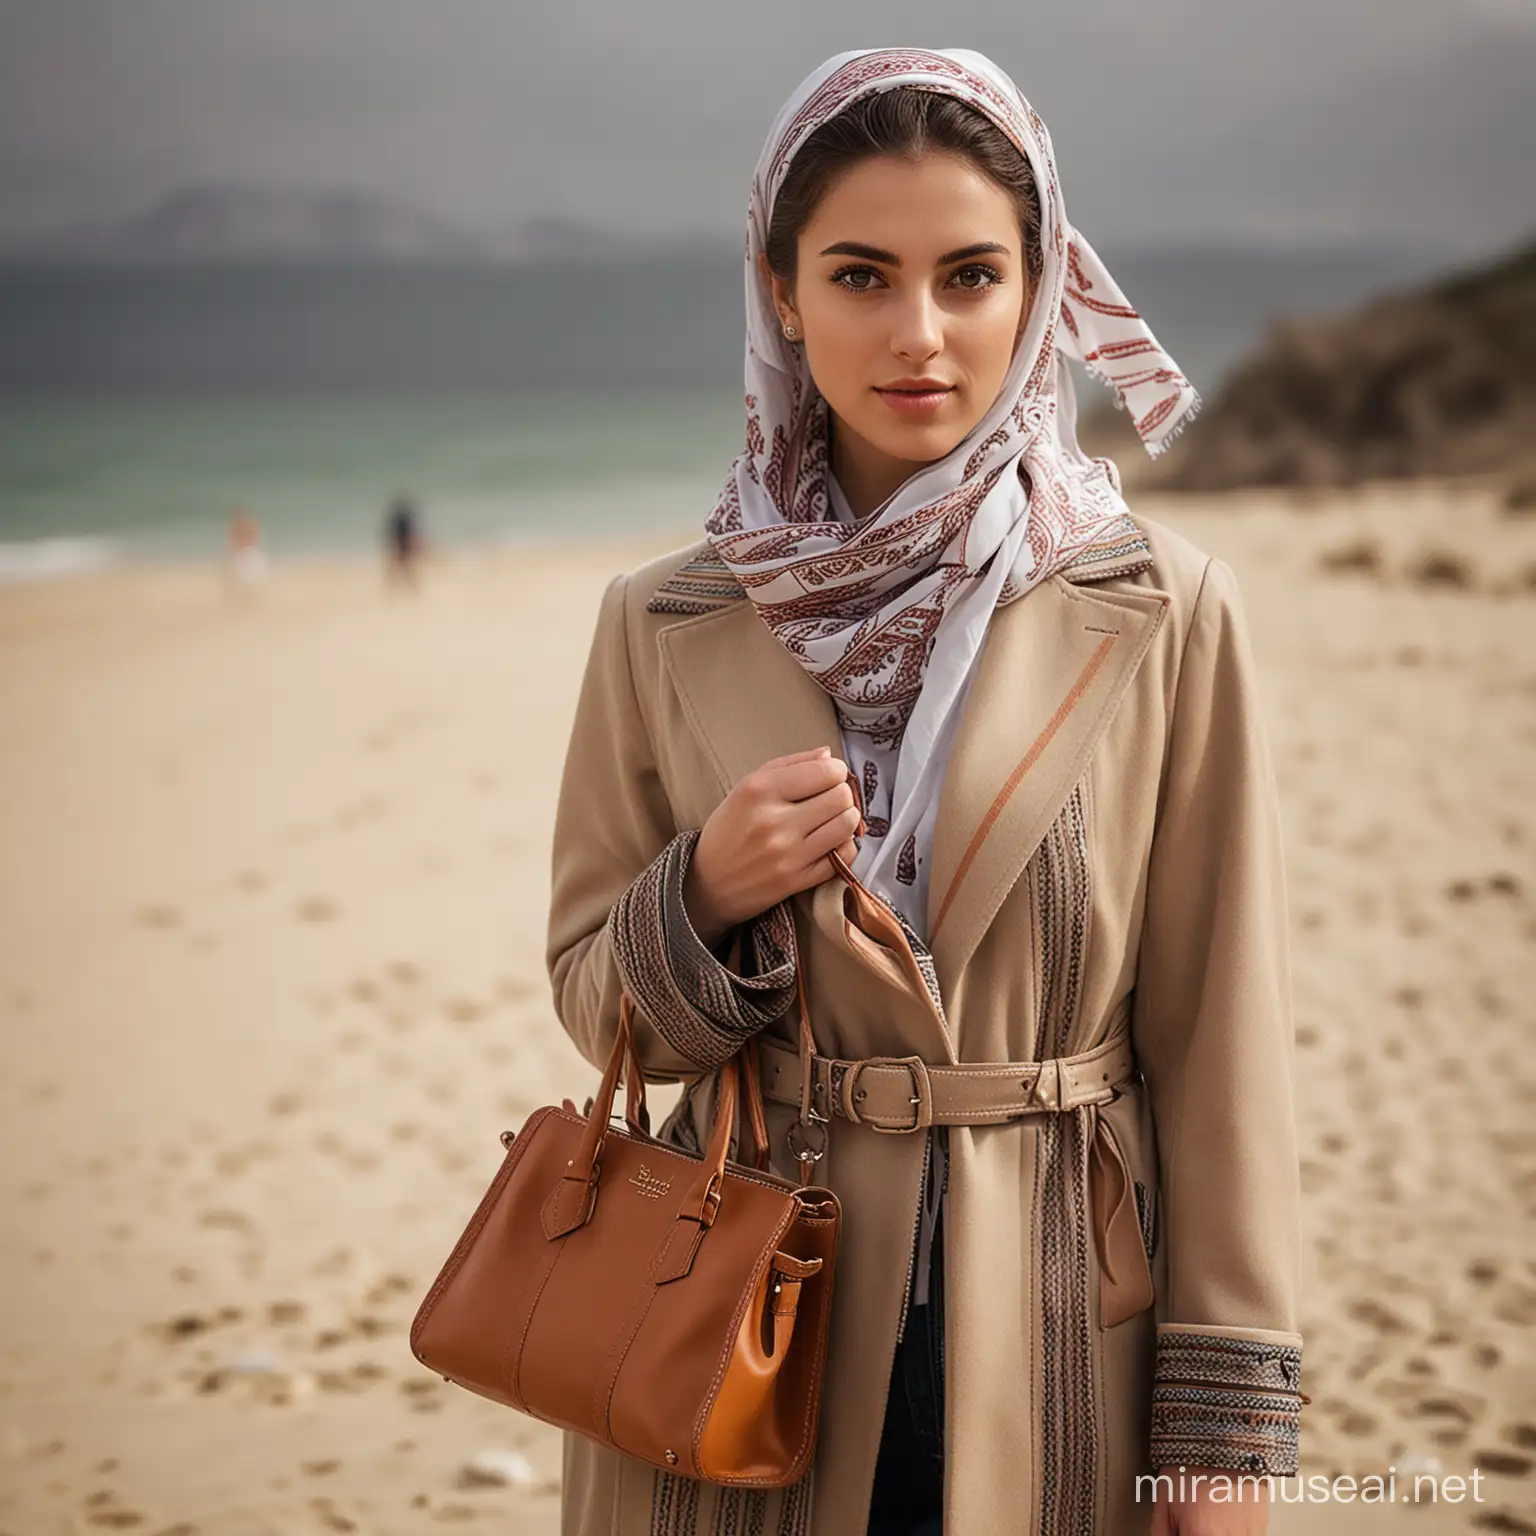 A beautiful girl with a modern headscarf and a stylish Tehran-style coat, carrying a small leather women’s bag, photographed on a beach street with the highest photographic quality and authenticity, using a 50mm lens